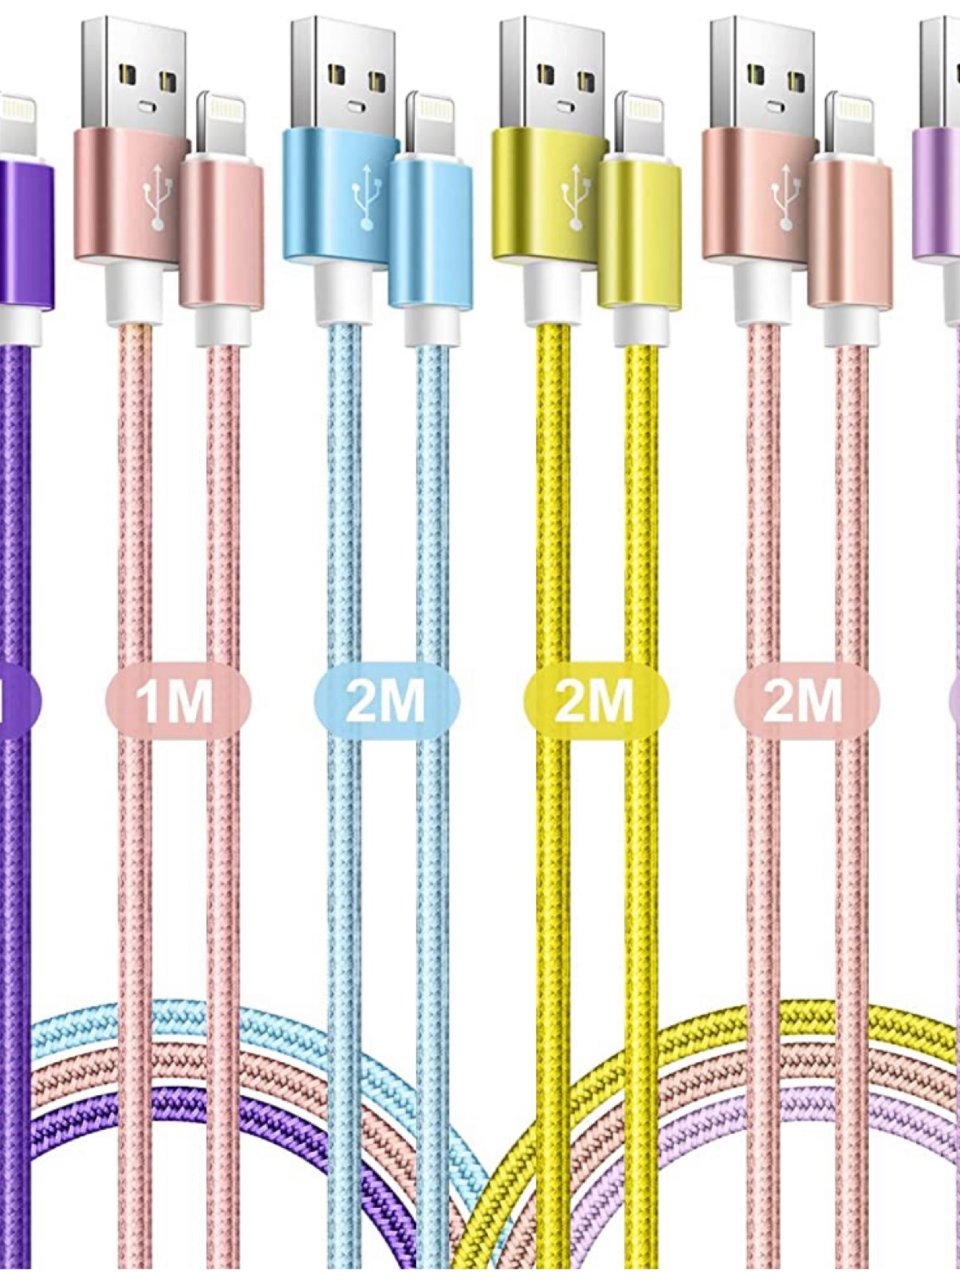 iPhone Charger Cord [Apple MFi Certified], 6pack (3,3,6,6,6,10ft) iPhone Charger,Nylon Braided Lightning Cable,iPhone Charging Cable Compatible with iPhone 14/13/12/11 Pro Max/XS/XR/X/8/7/6S/6 /iPad : Amazon.ca: Electronics